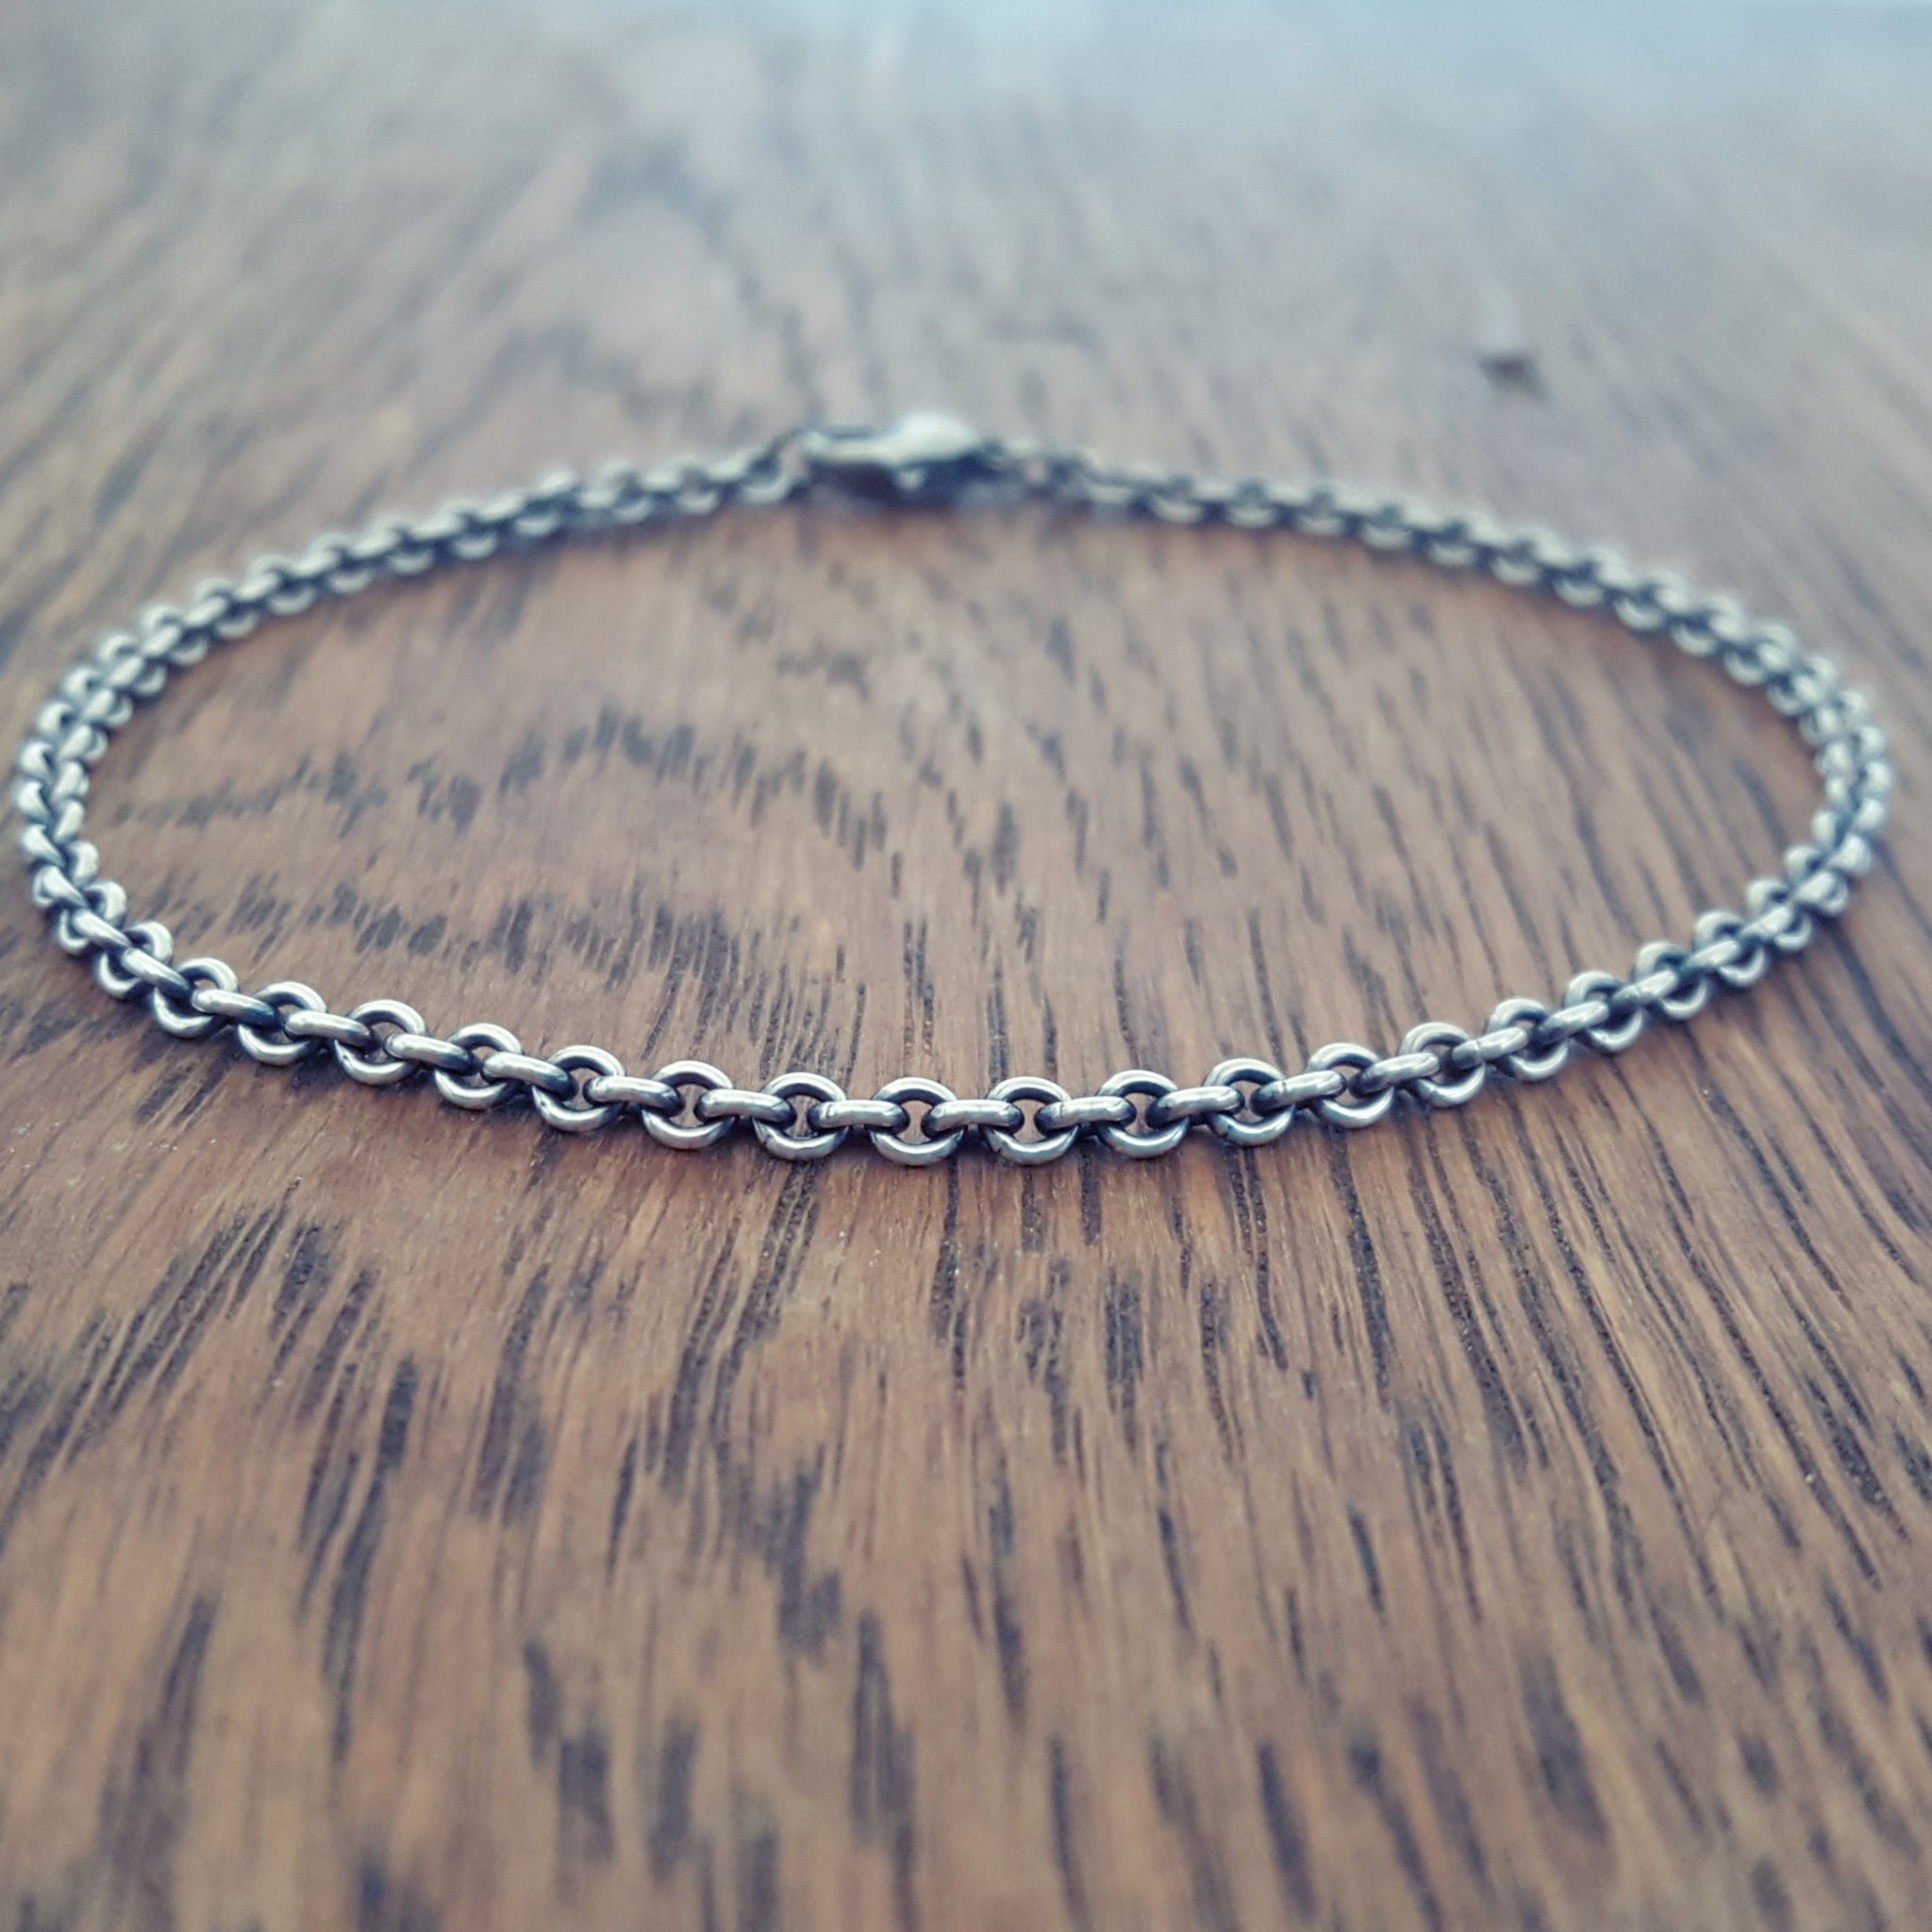 Minimal 925 Silver Bracelet With Lightweight Antiqued Cable Links, 2.8mm